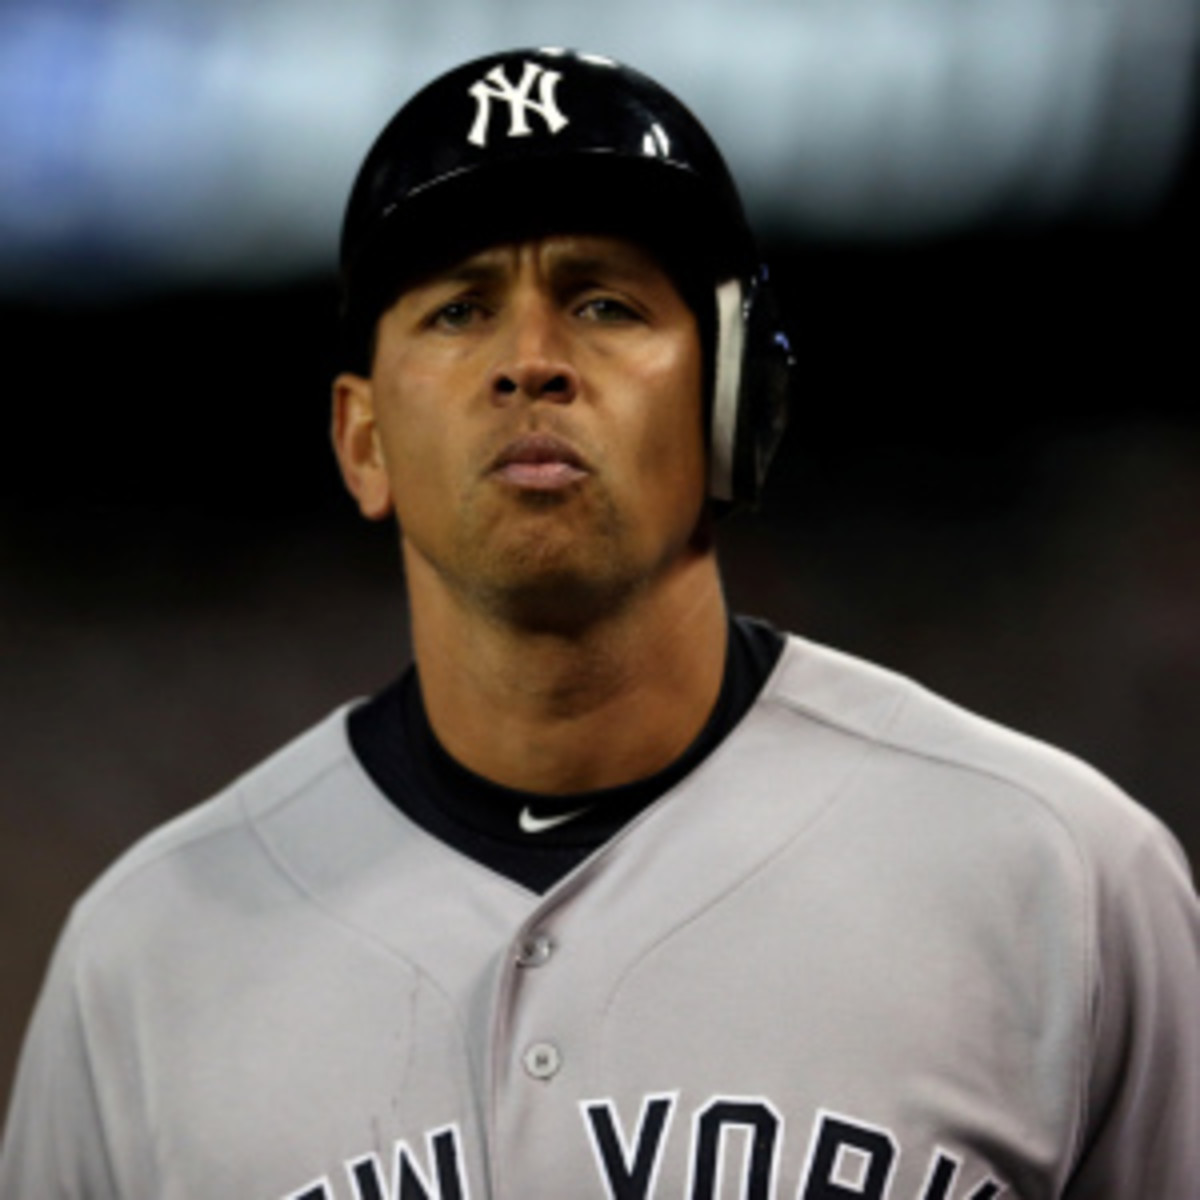 Alex Rodriguez raised more than $400K for charity in 2006 but reportedly donated only $5K of it. (Jonathan Daniel/Getty Images)